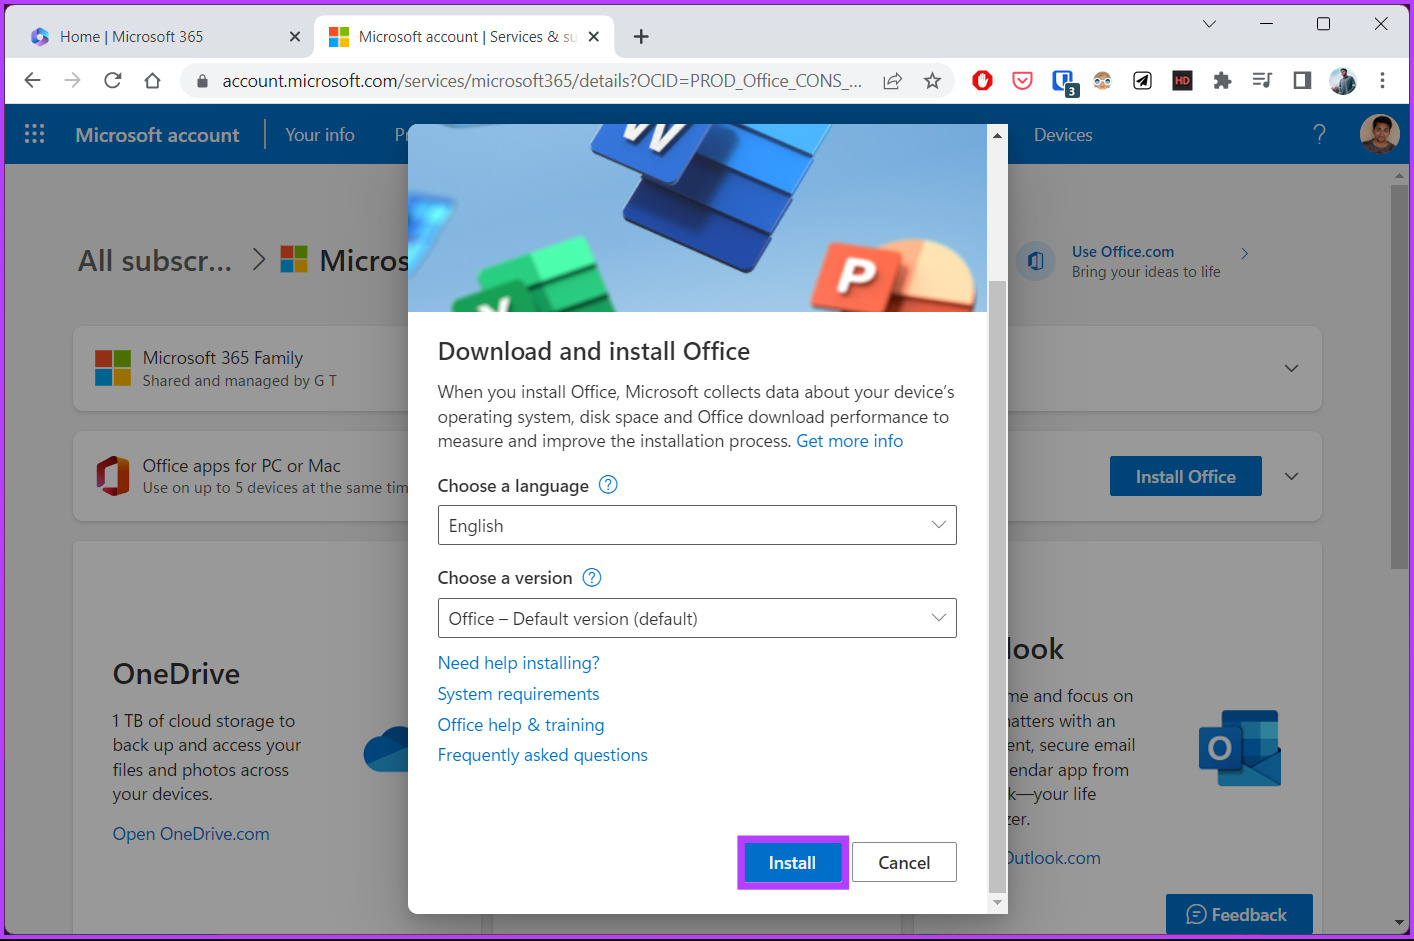 install the latest version of Microsoft Office